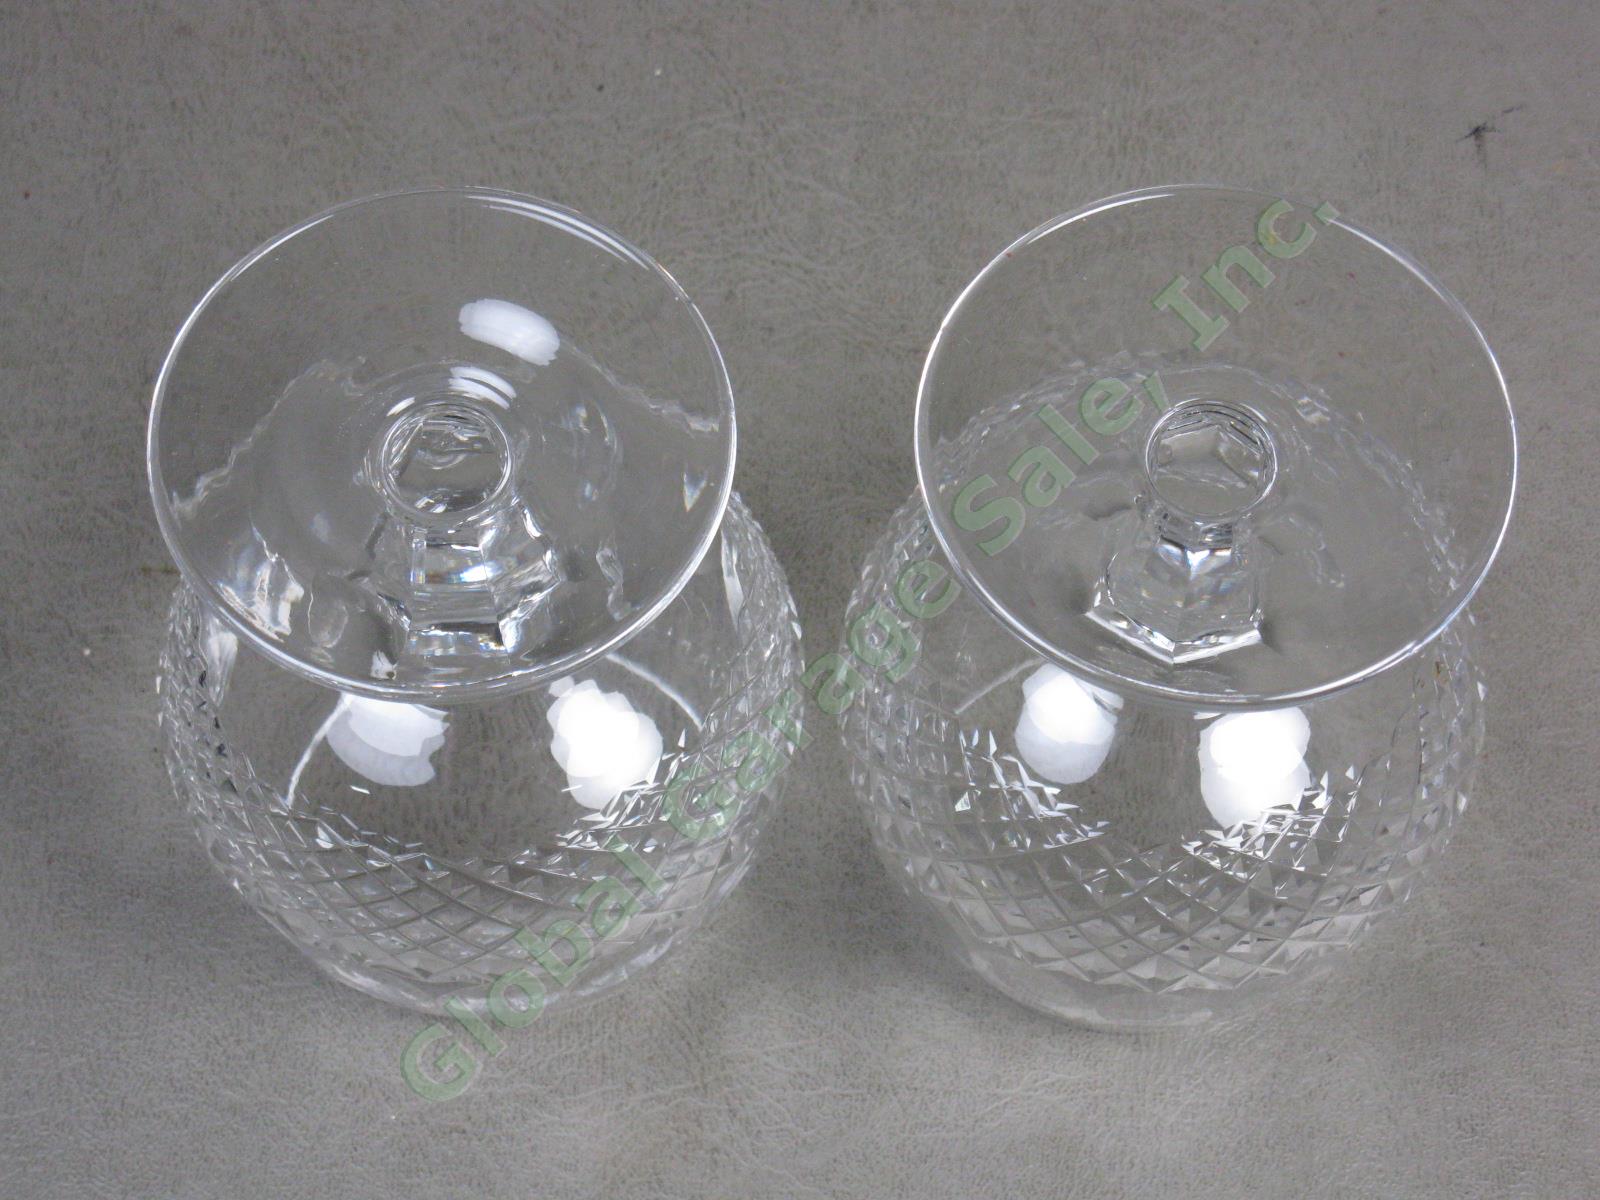 2 Waterford Cut Lead Crystal Colleen Brandy Snifter Glasses Pair Set Lot 5-1/8" 4